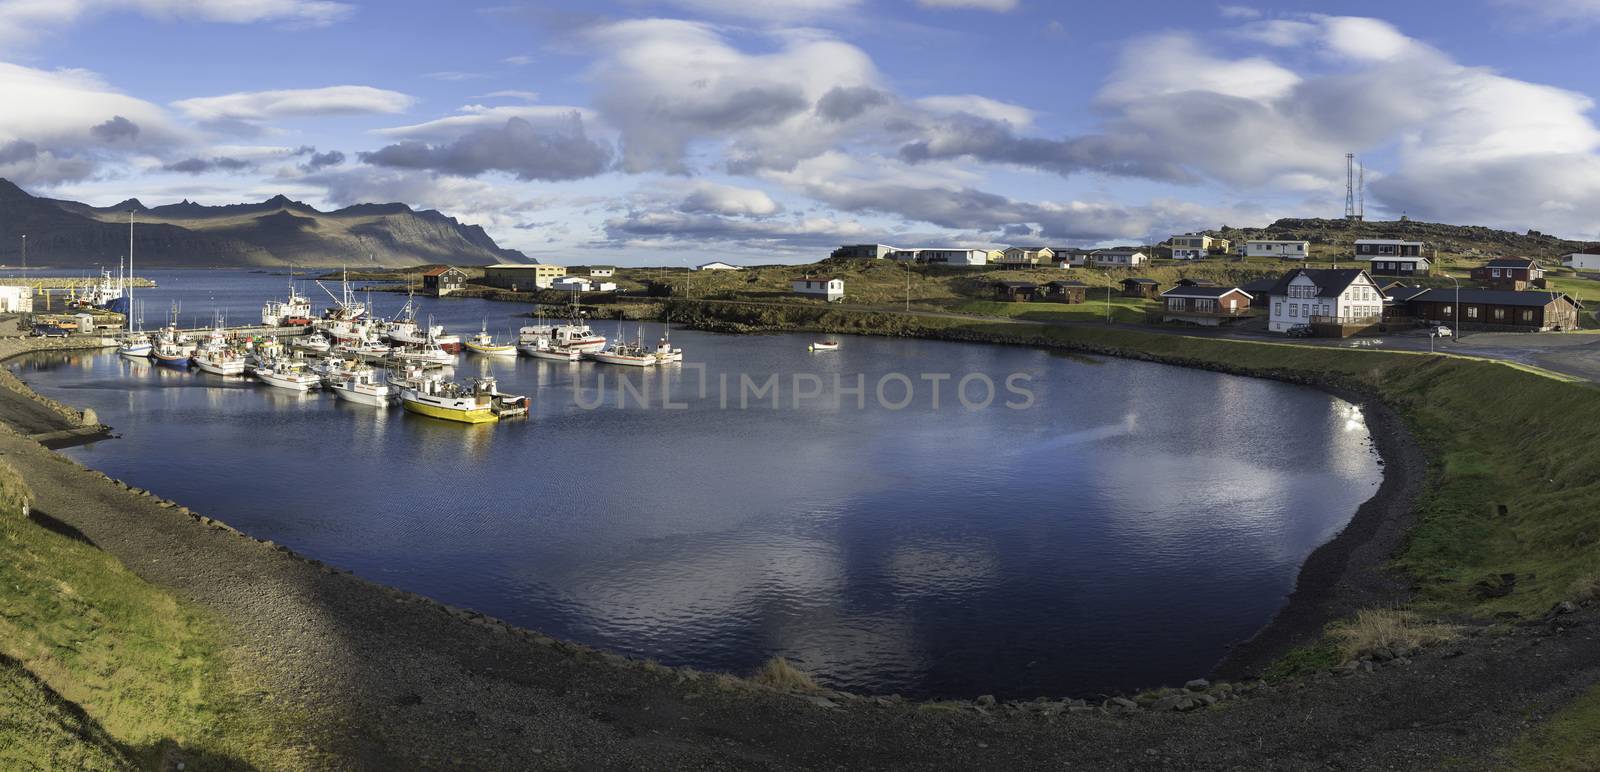 ICELAND : Djupivogur is a small town and harbor in the eastern fjords, which was a tiny port with a Danish colonial trading base.